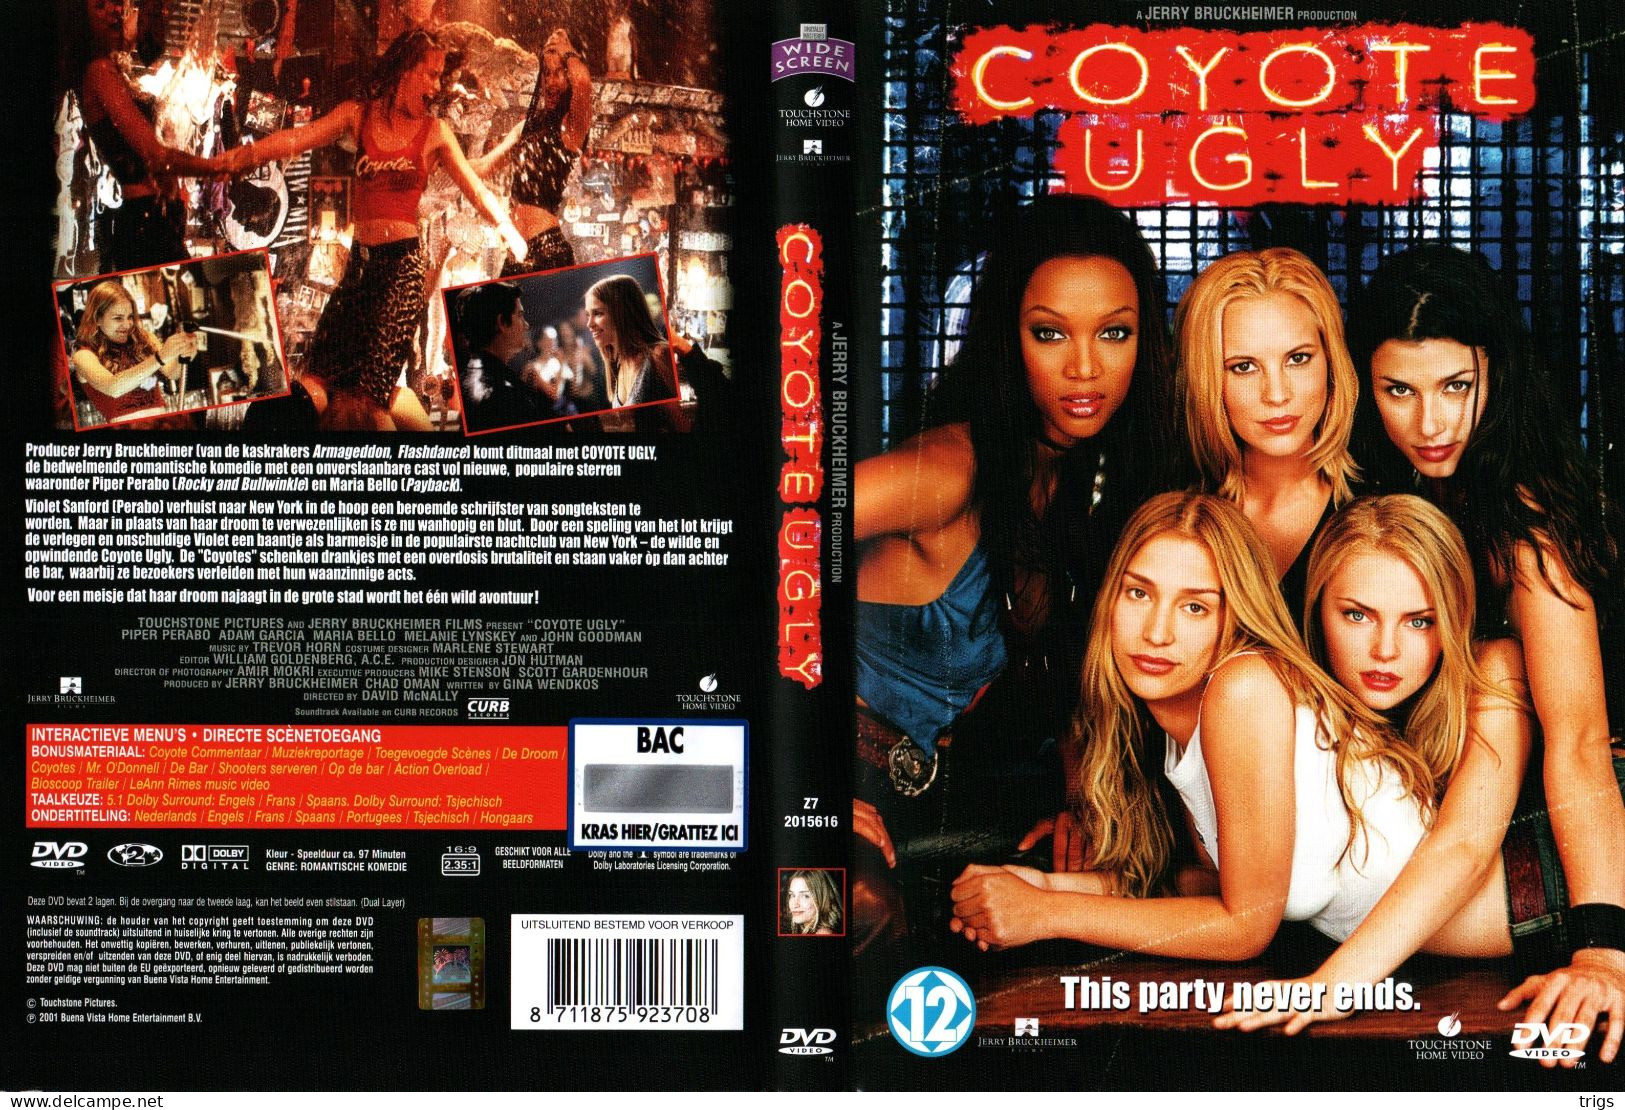 DVD - Coyote Ugly - Comedy